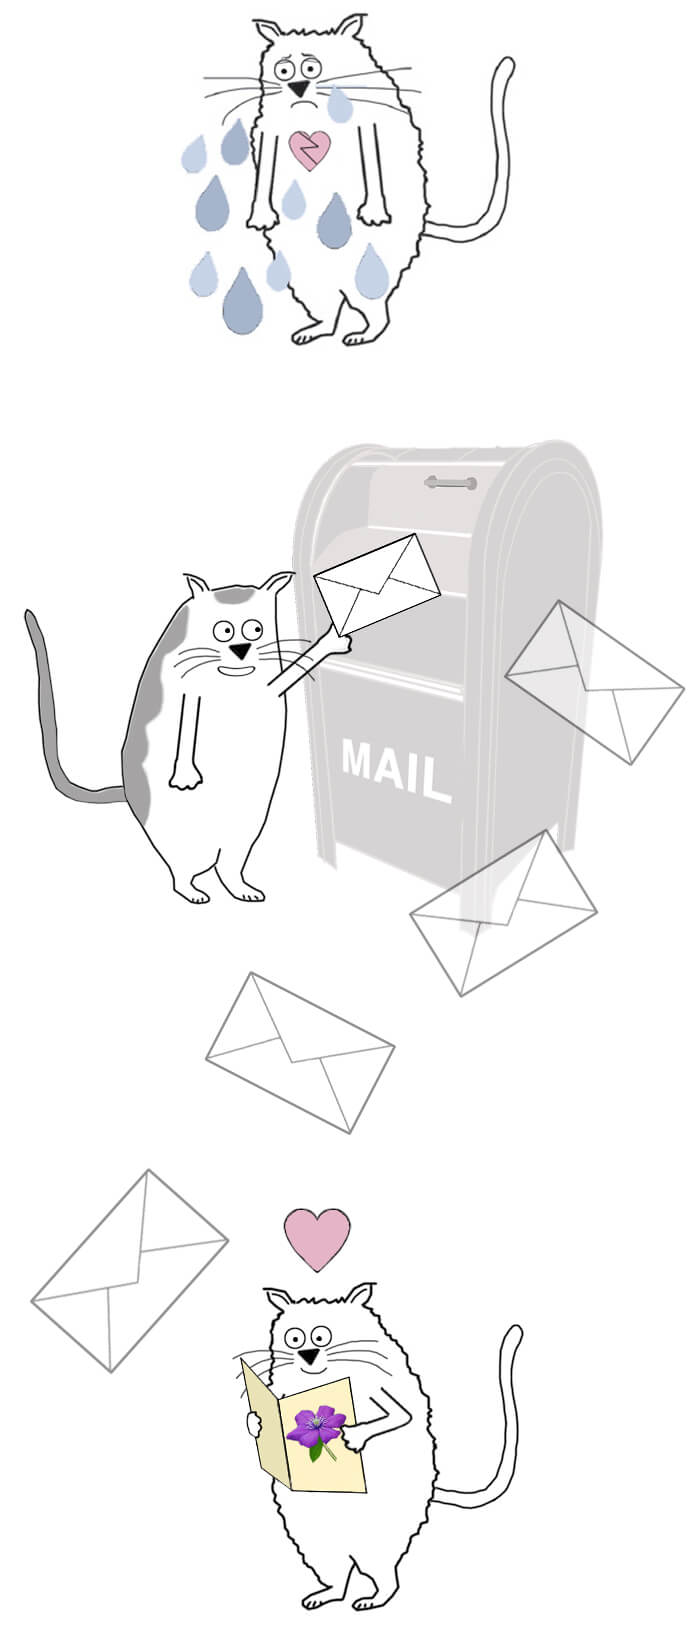 cartoon cat puts a card in a mailbox and it goes to a cat friend and cheers them up